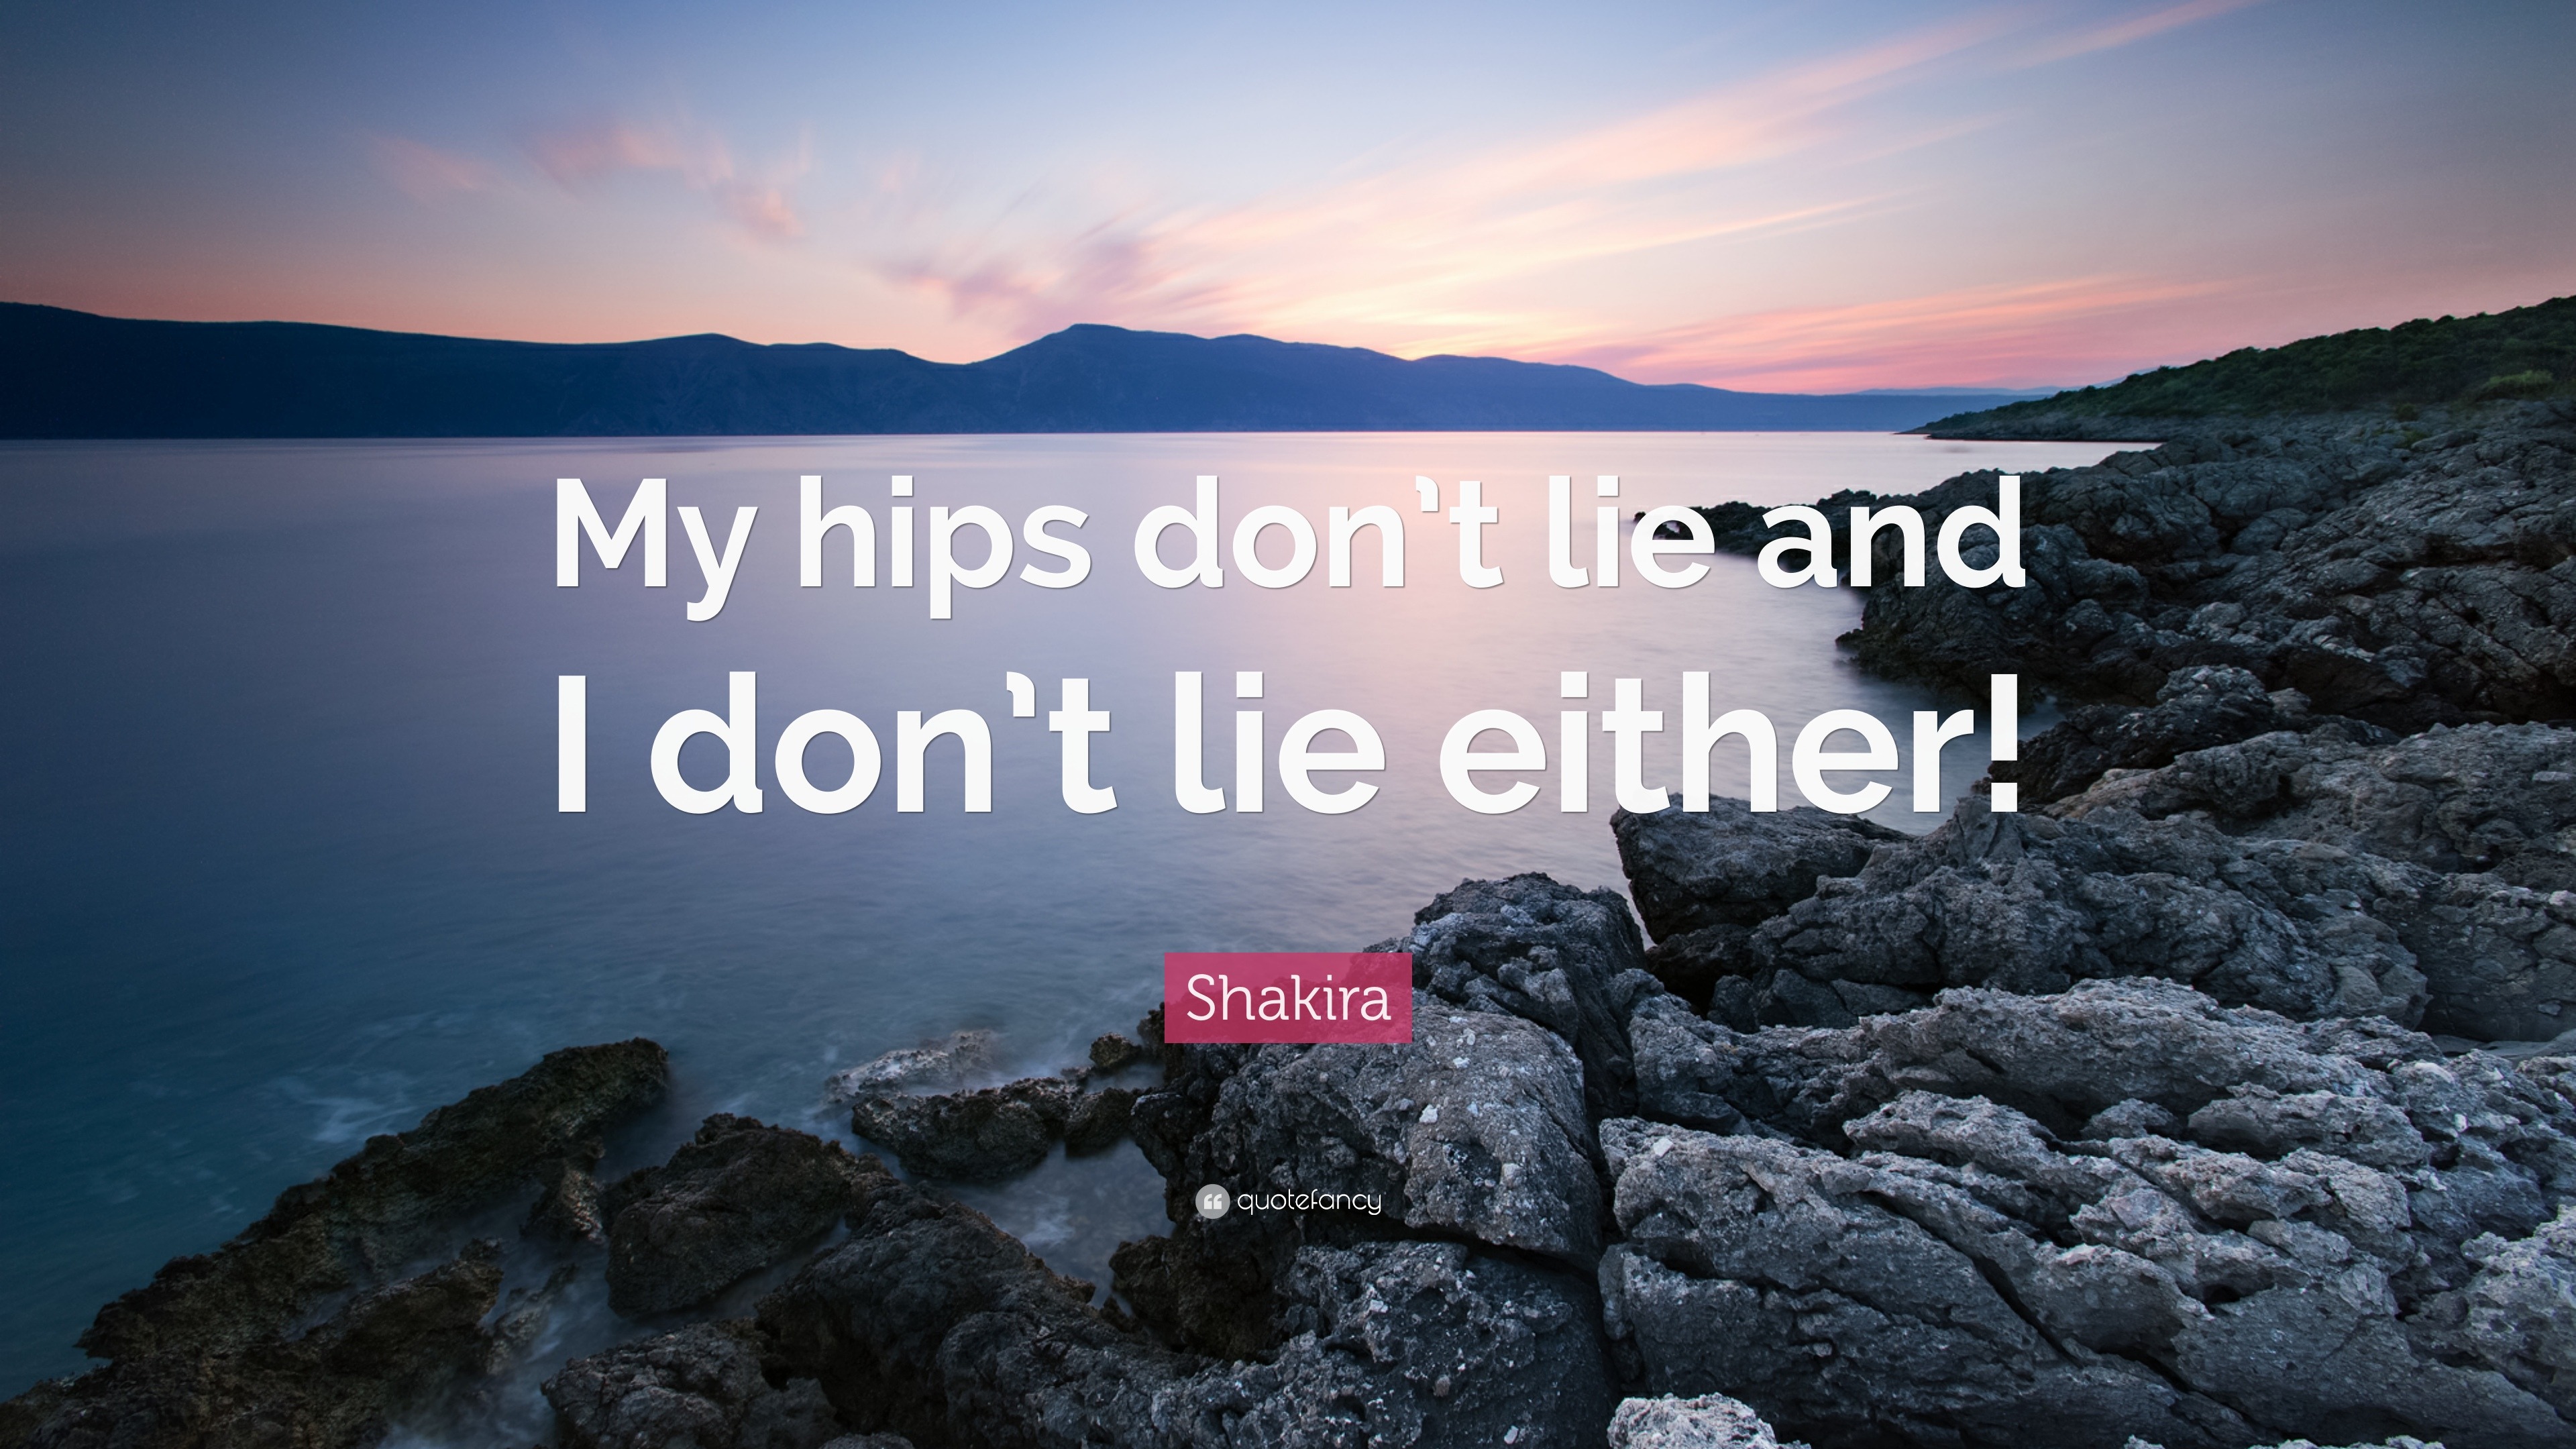 shakira these hips don t lie